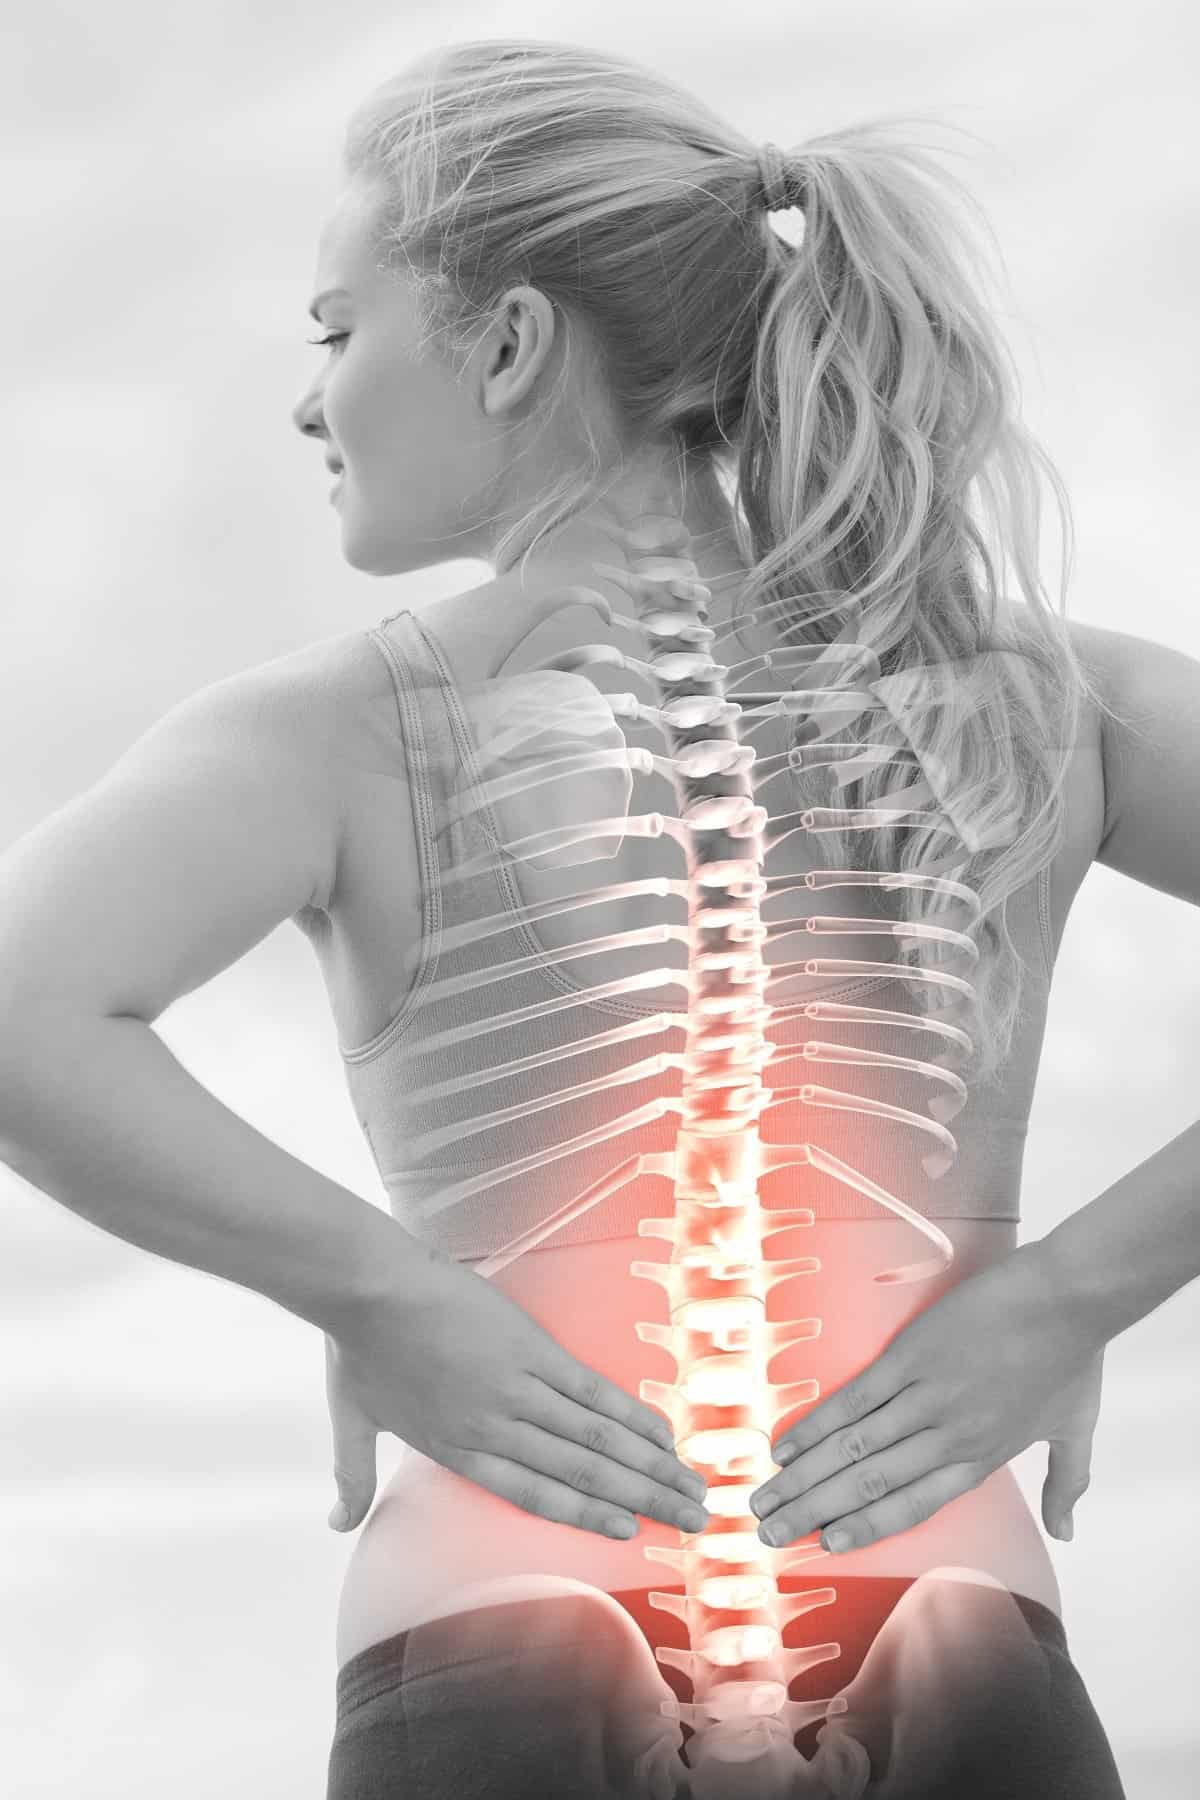 woman holding her back in pain, you can see her spine like you would on an xray